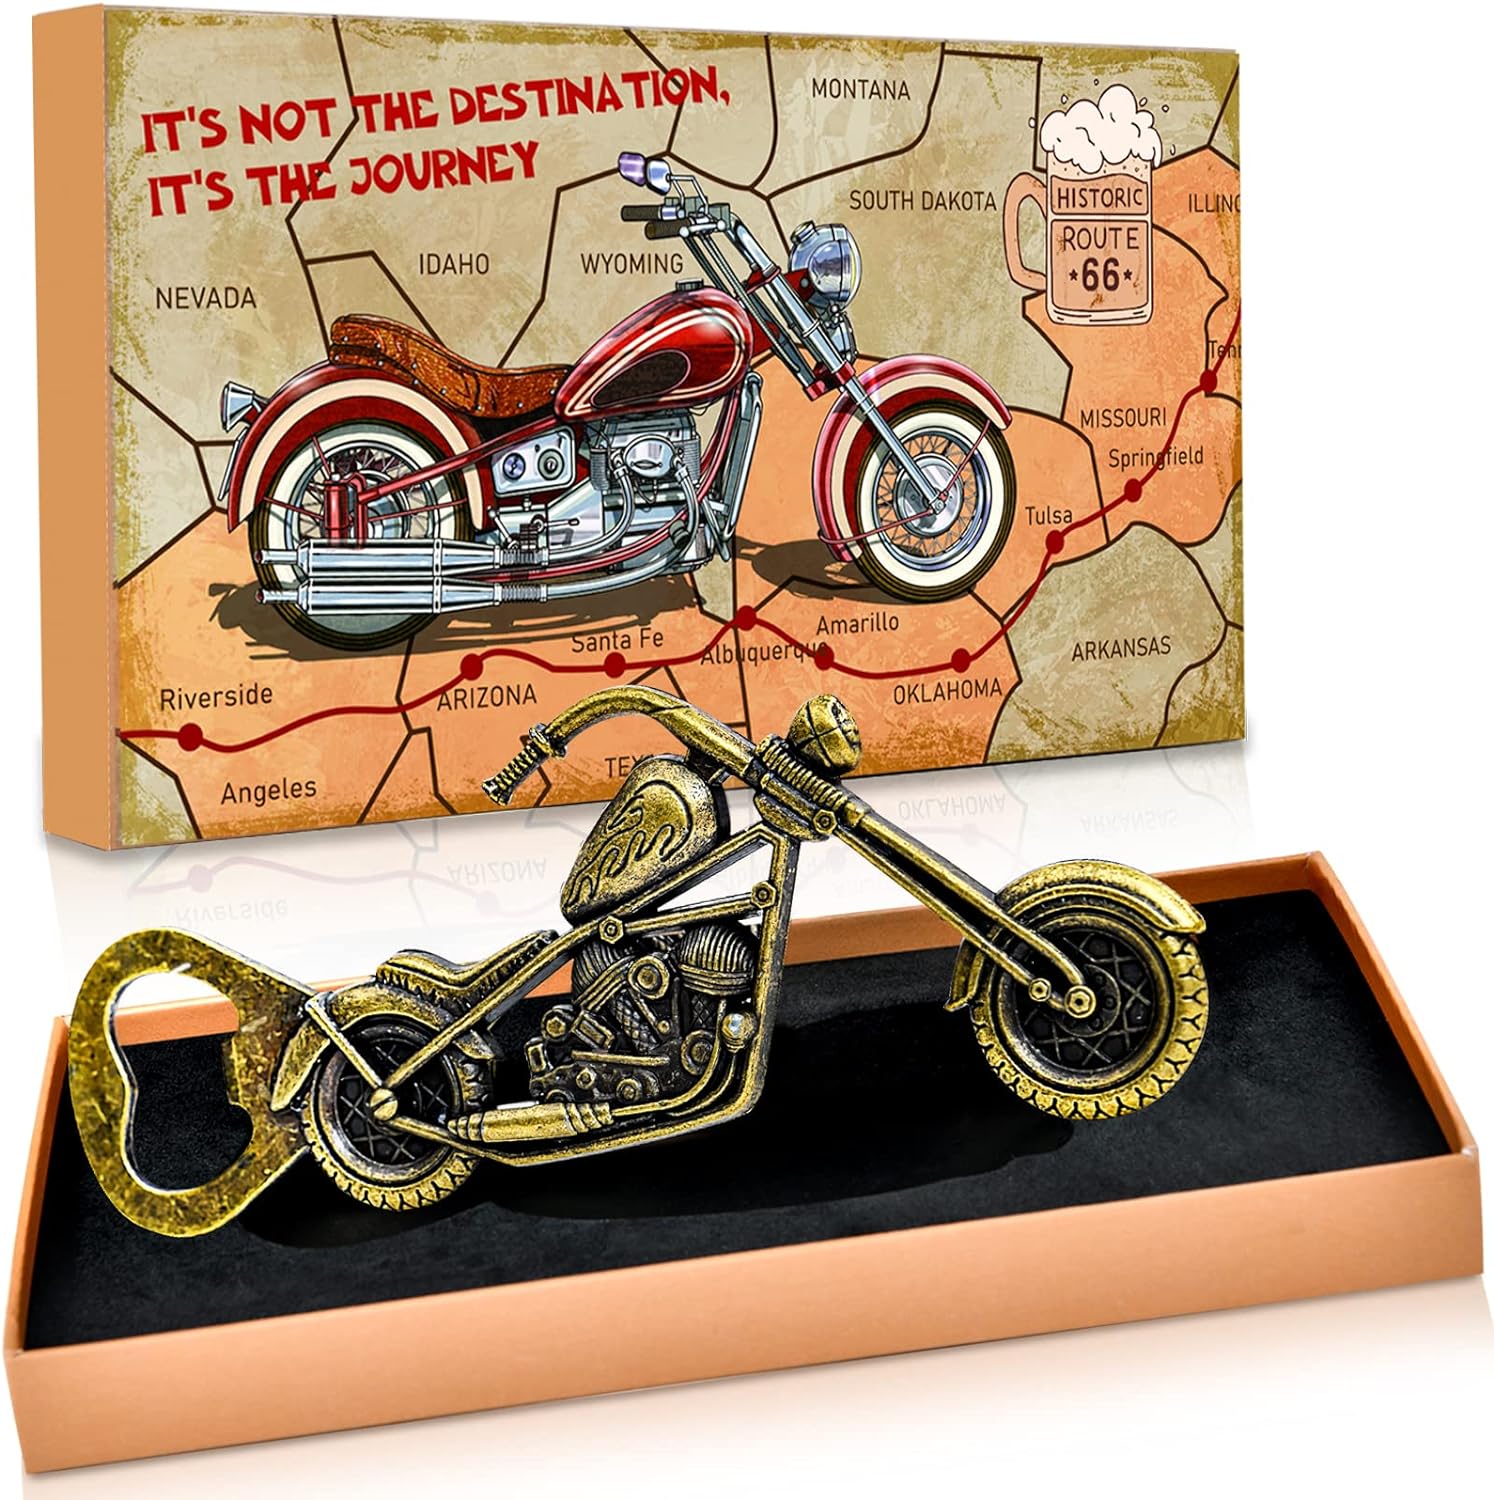 Funny Novelty Motorbike Gifts for Men - Unique Beer Gifts Christmas Stocking Fillers for Dad Men Adults Bottle Openers Cool Gadgets Birthday Christmas Secret Santa Gift Ideas for Teacher Male Presents